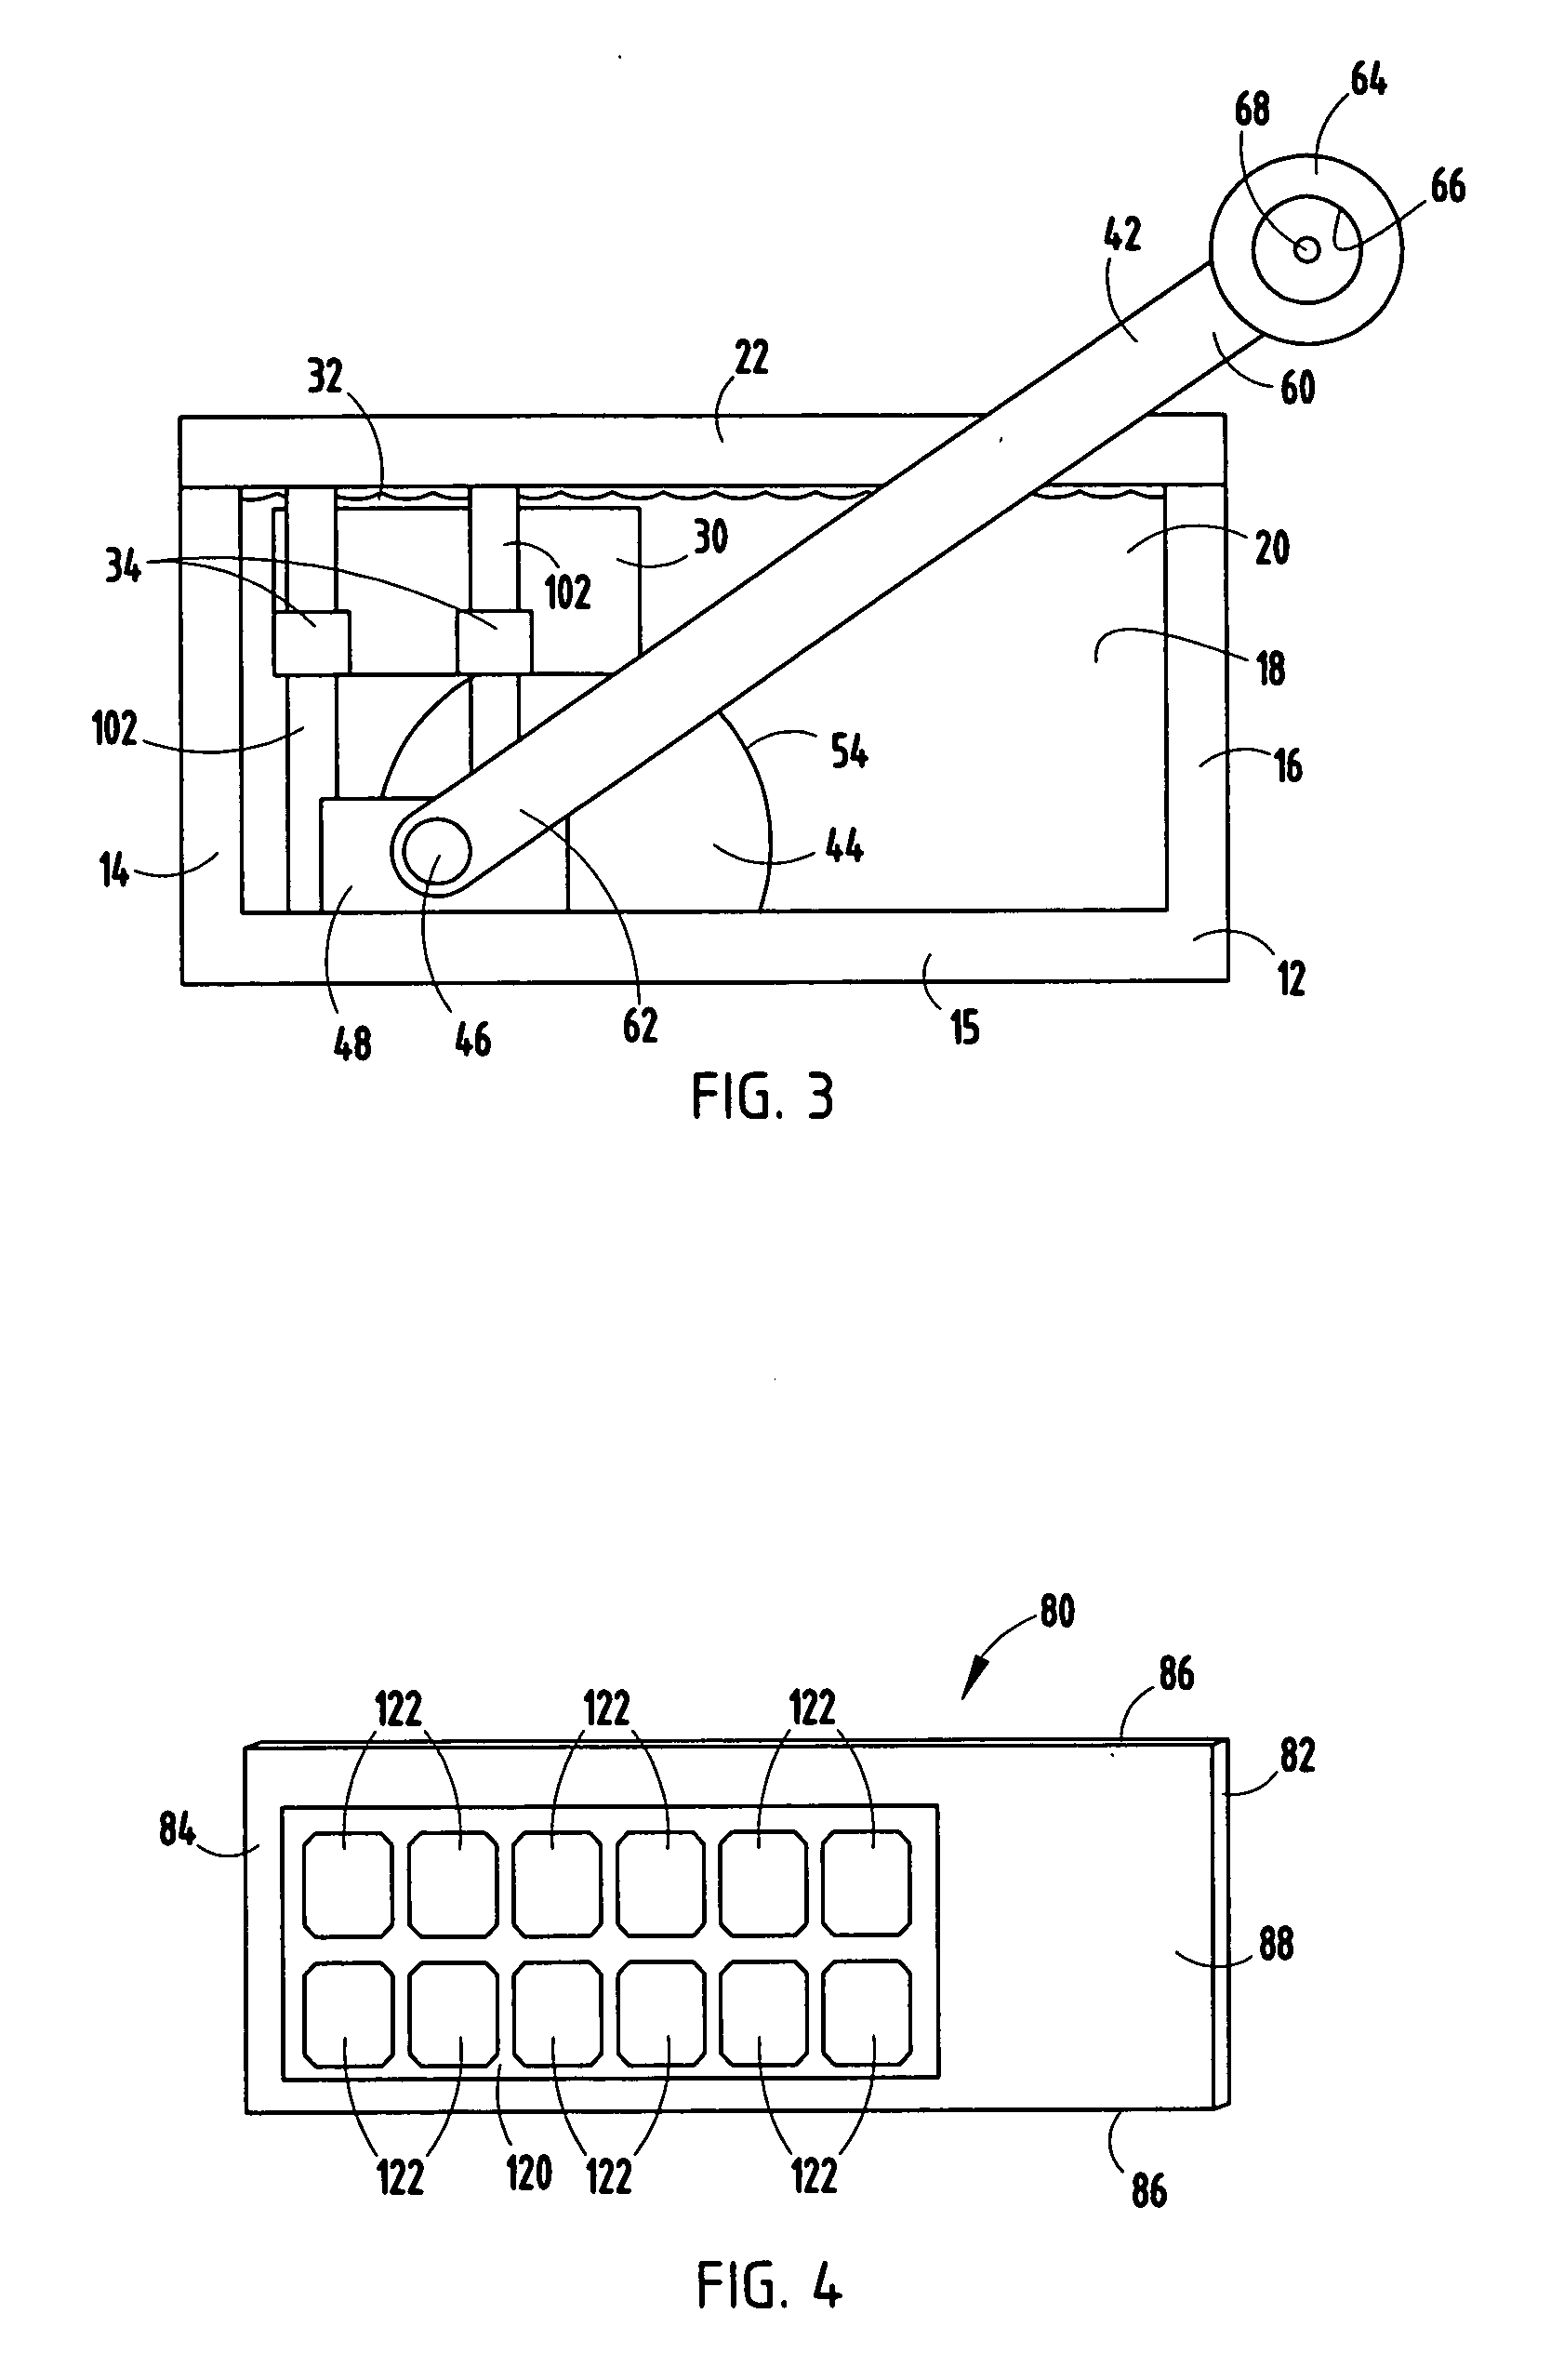 Method and apparatus for making partitioned slides